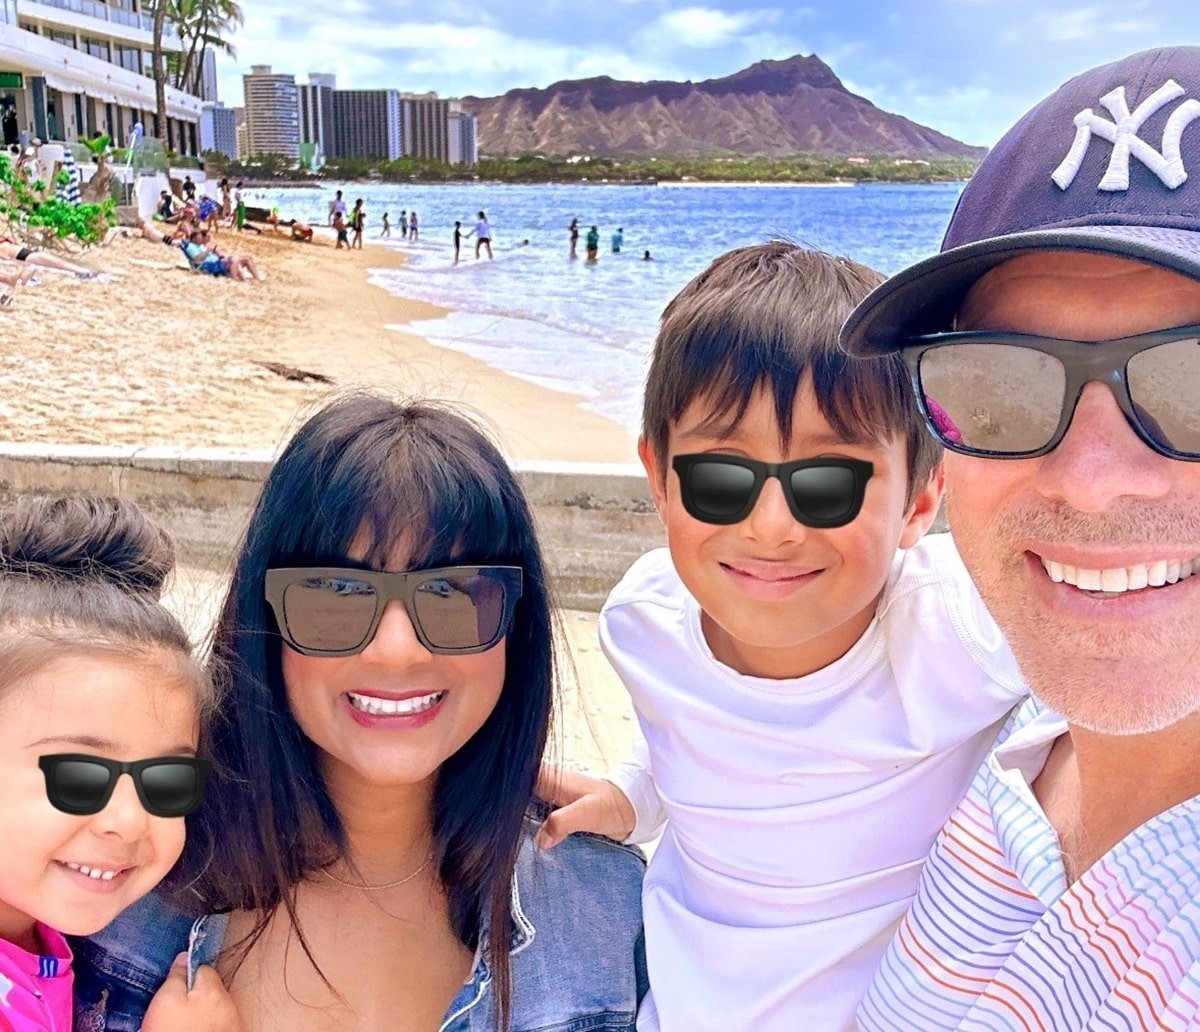 Johnny Jet and his family in Hawaii.